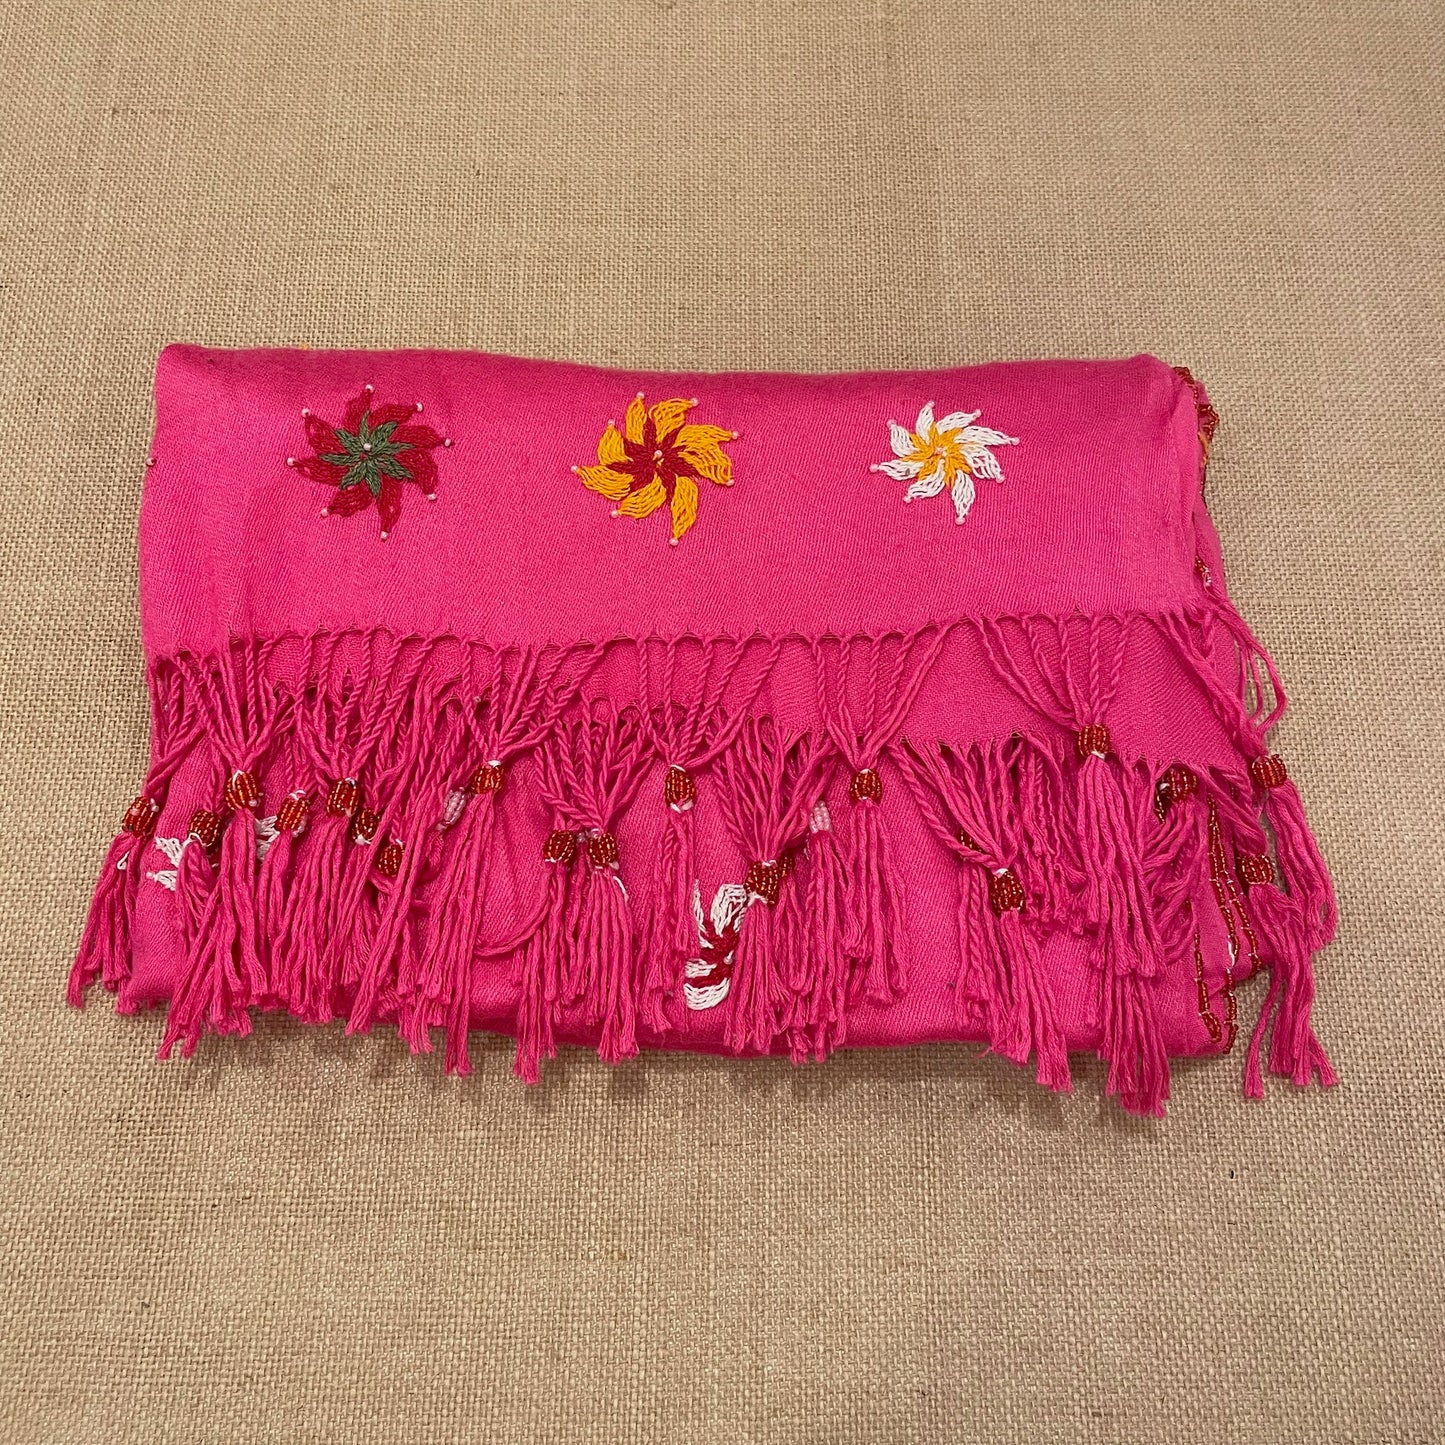 Bedouin Hand-embroidered Hot Pink Pashmina Scarf folded